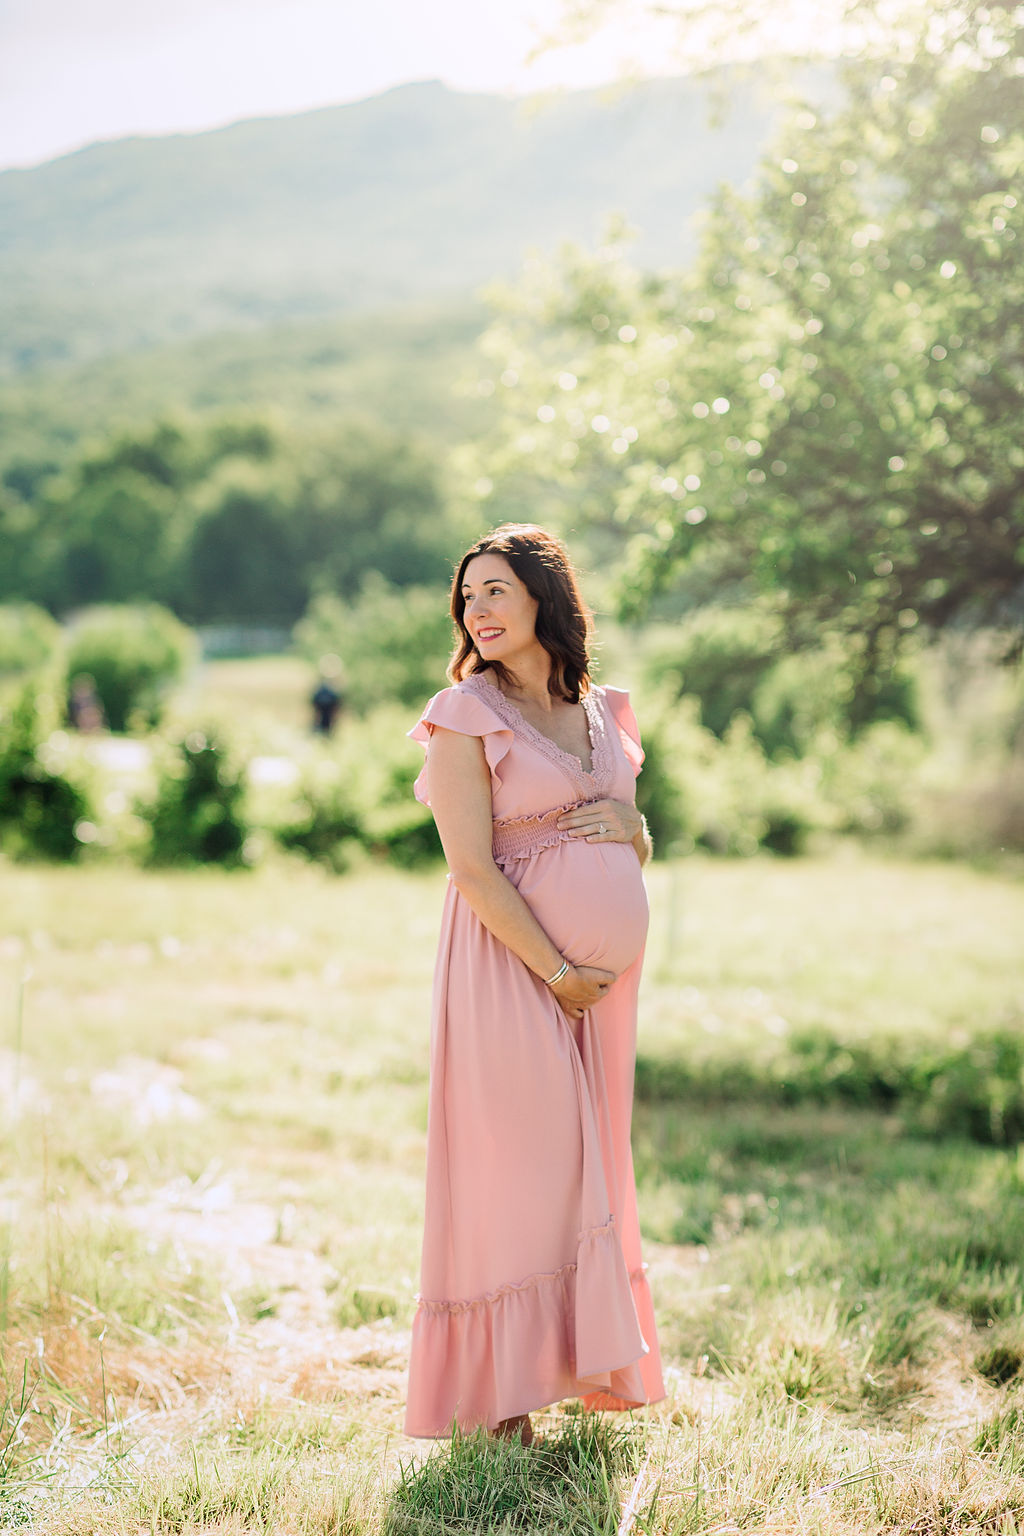 Mother to be wearing a pink maternity gown stands in a grassy field by a tree prenatal yoga charlottesville